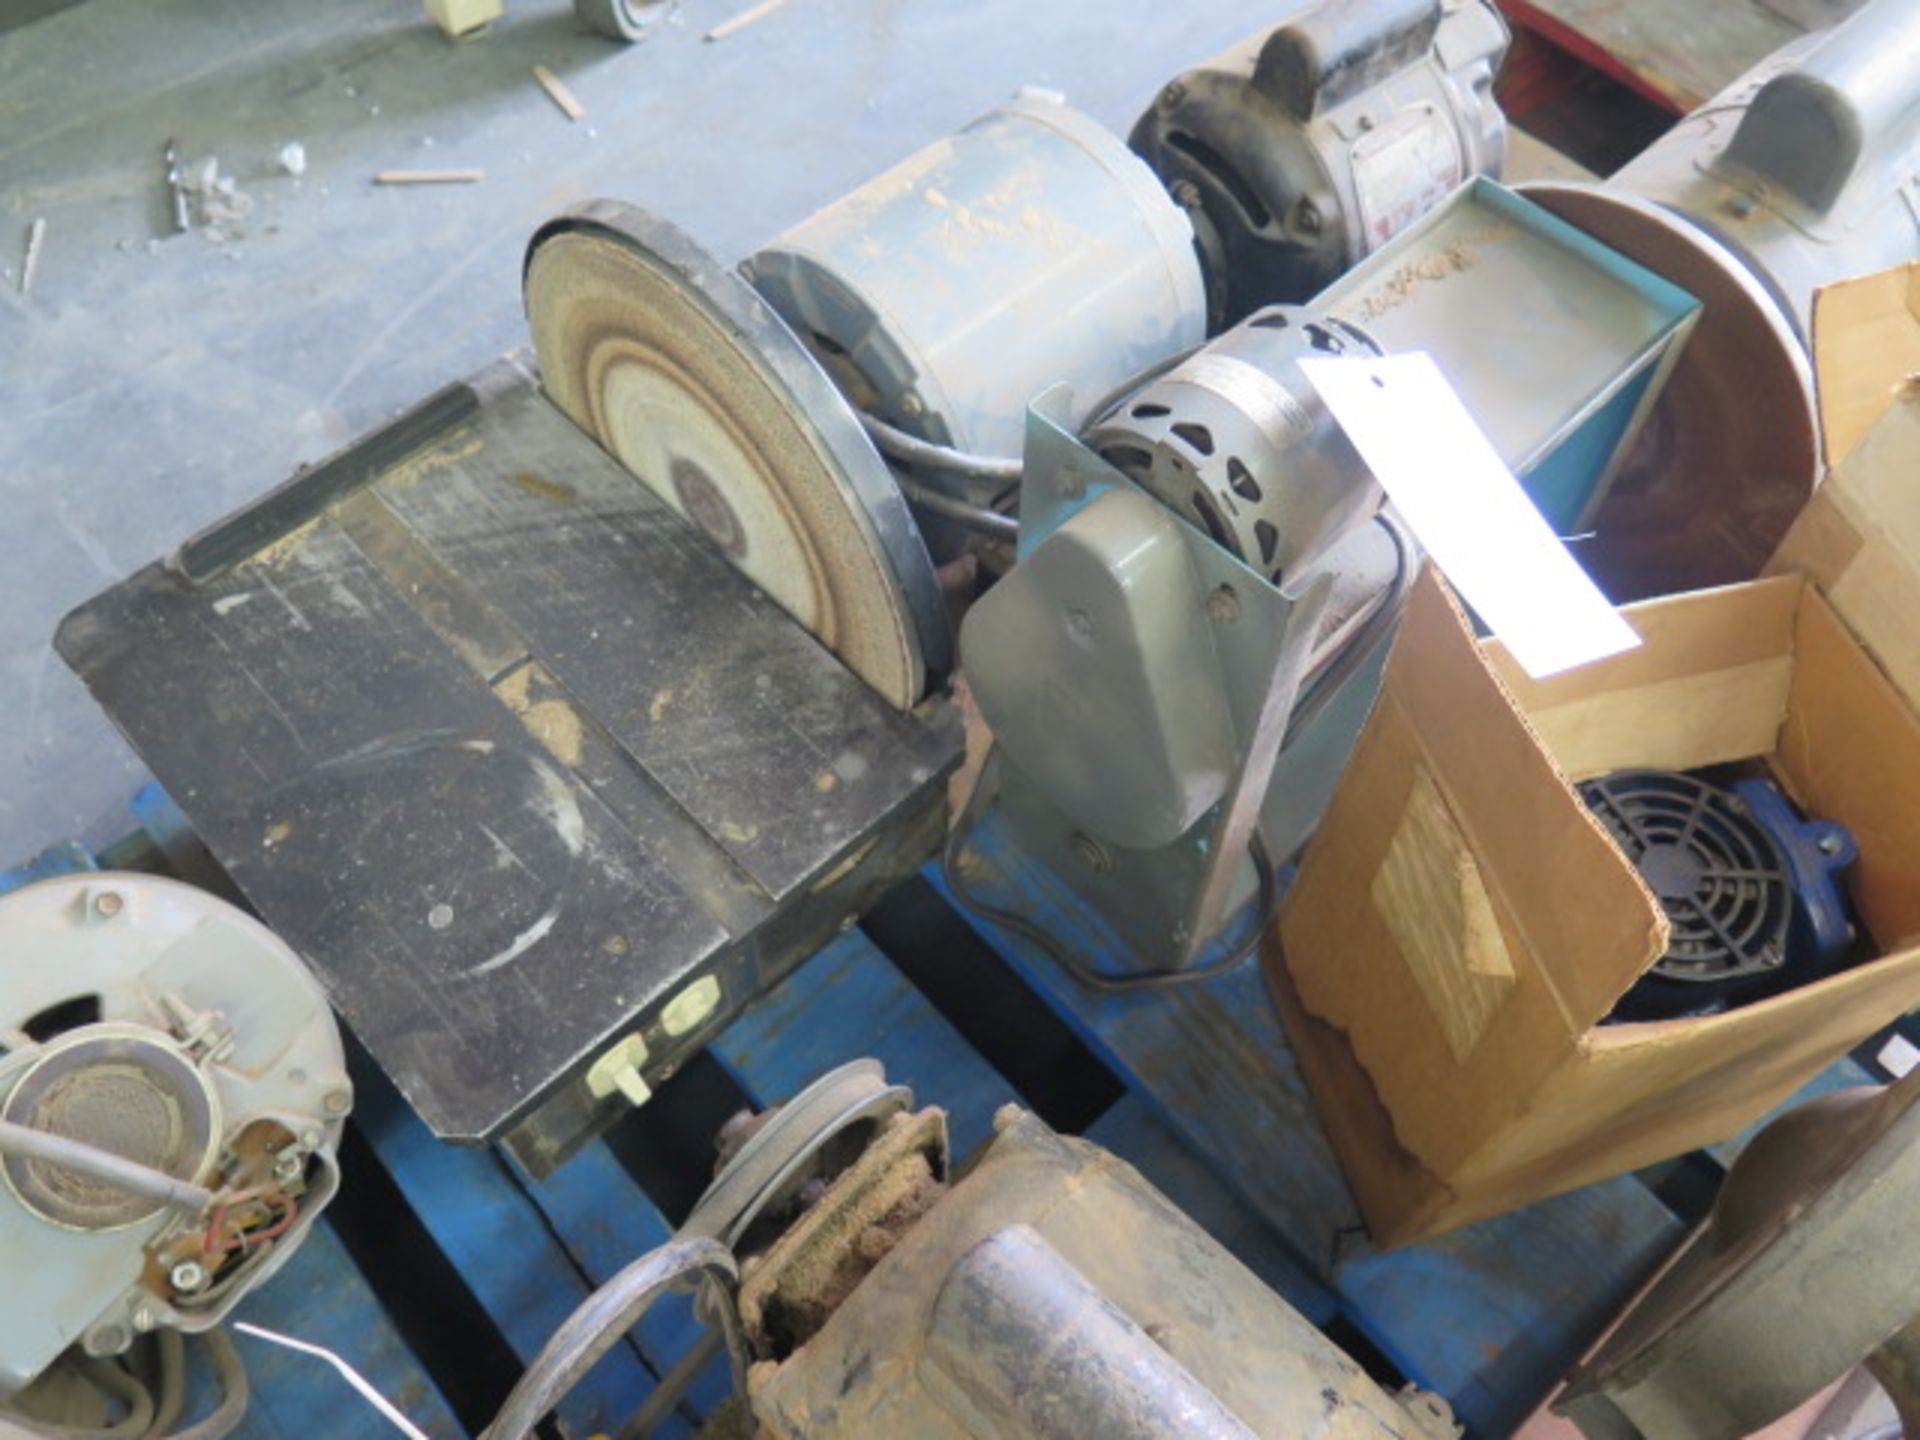 Disc Sanders, Belt Sander, Bench Grinders and Misc (1-Pallet), SOLD AS IS WITH NO WARRANTY - Image 3 of 6